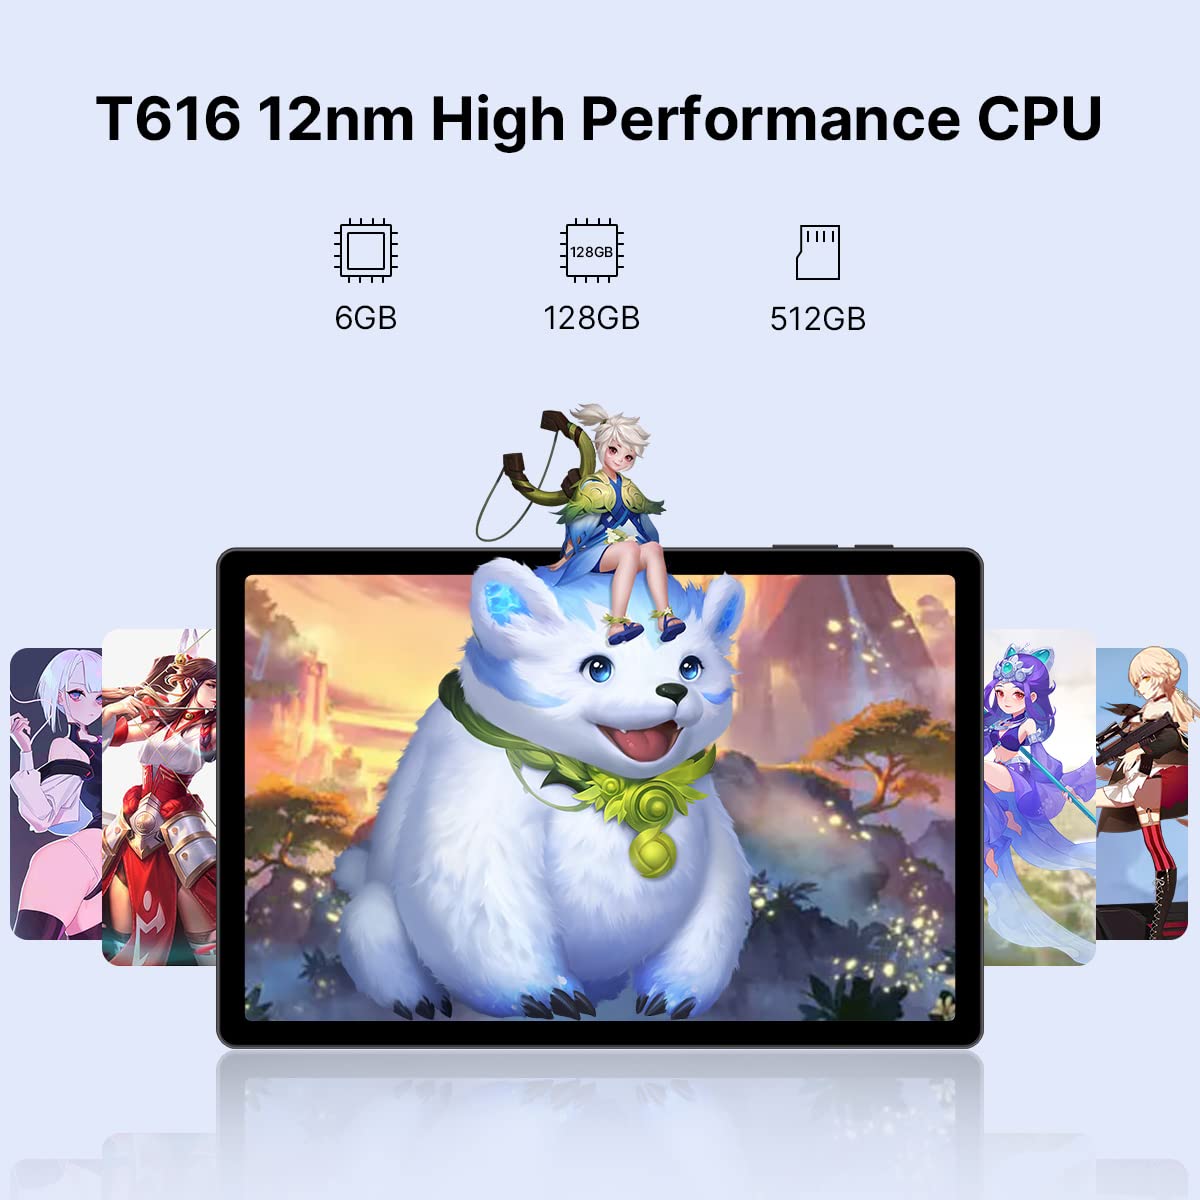 Android 12 Tablets & Phone 10.5 Inch Tablet with 5Ghz WiFi/ 4G LTE Octa-core 6GB RAM 128GB ROM 1920x1200 FHD IPS Screen 7500mAh Batterry 5+13MP Camera